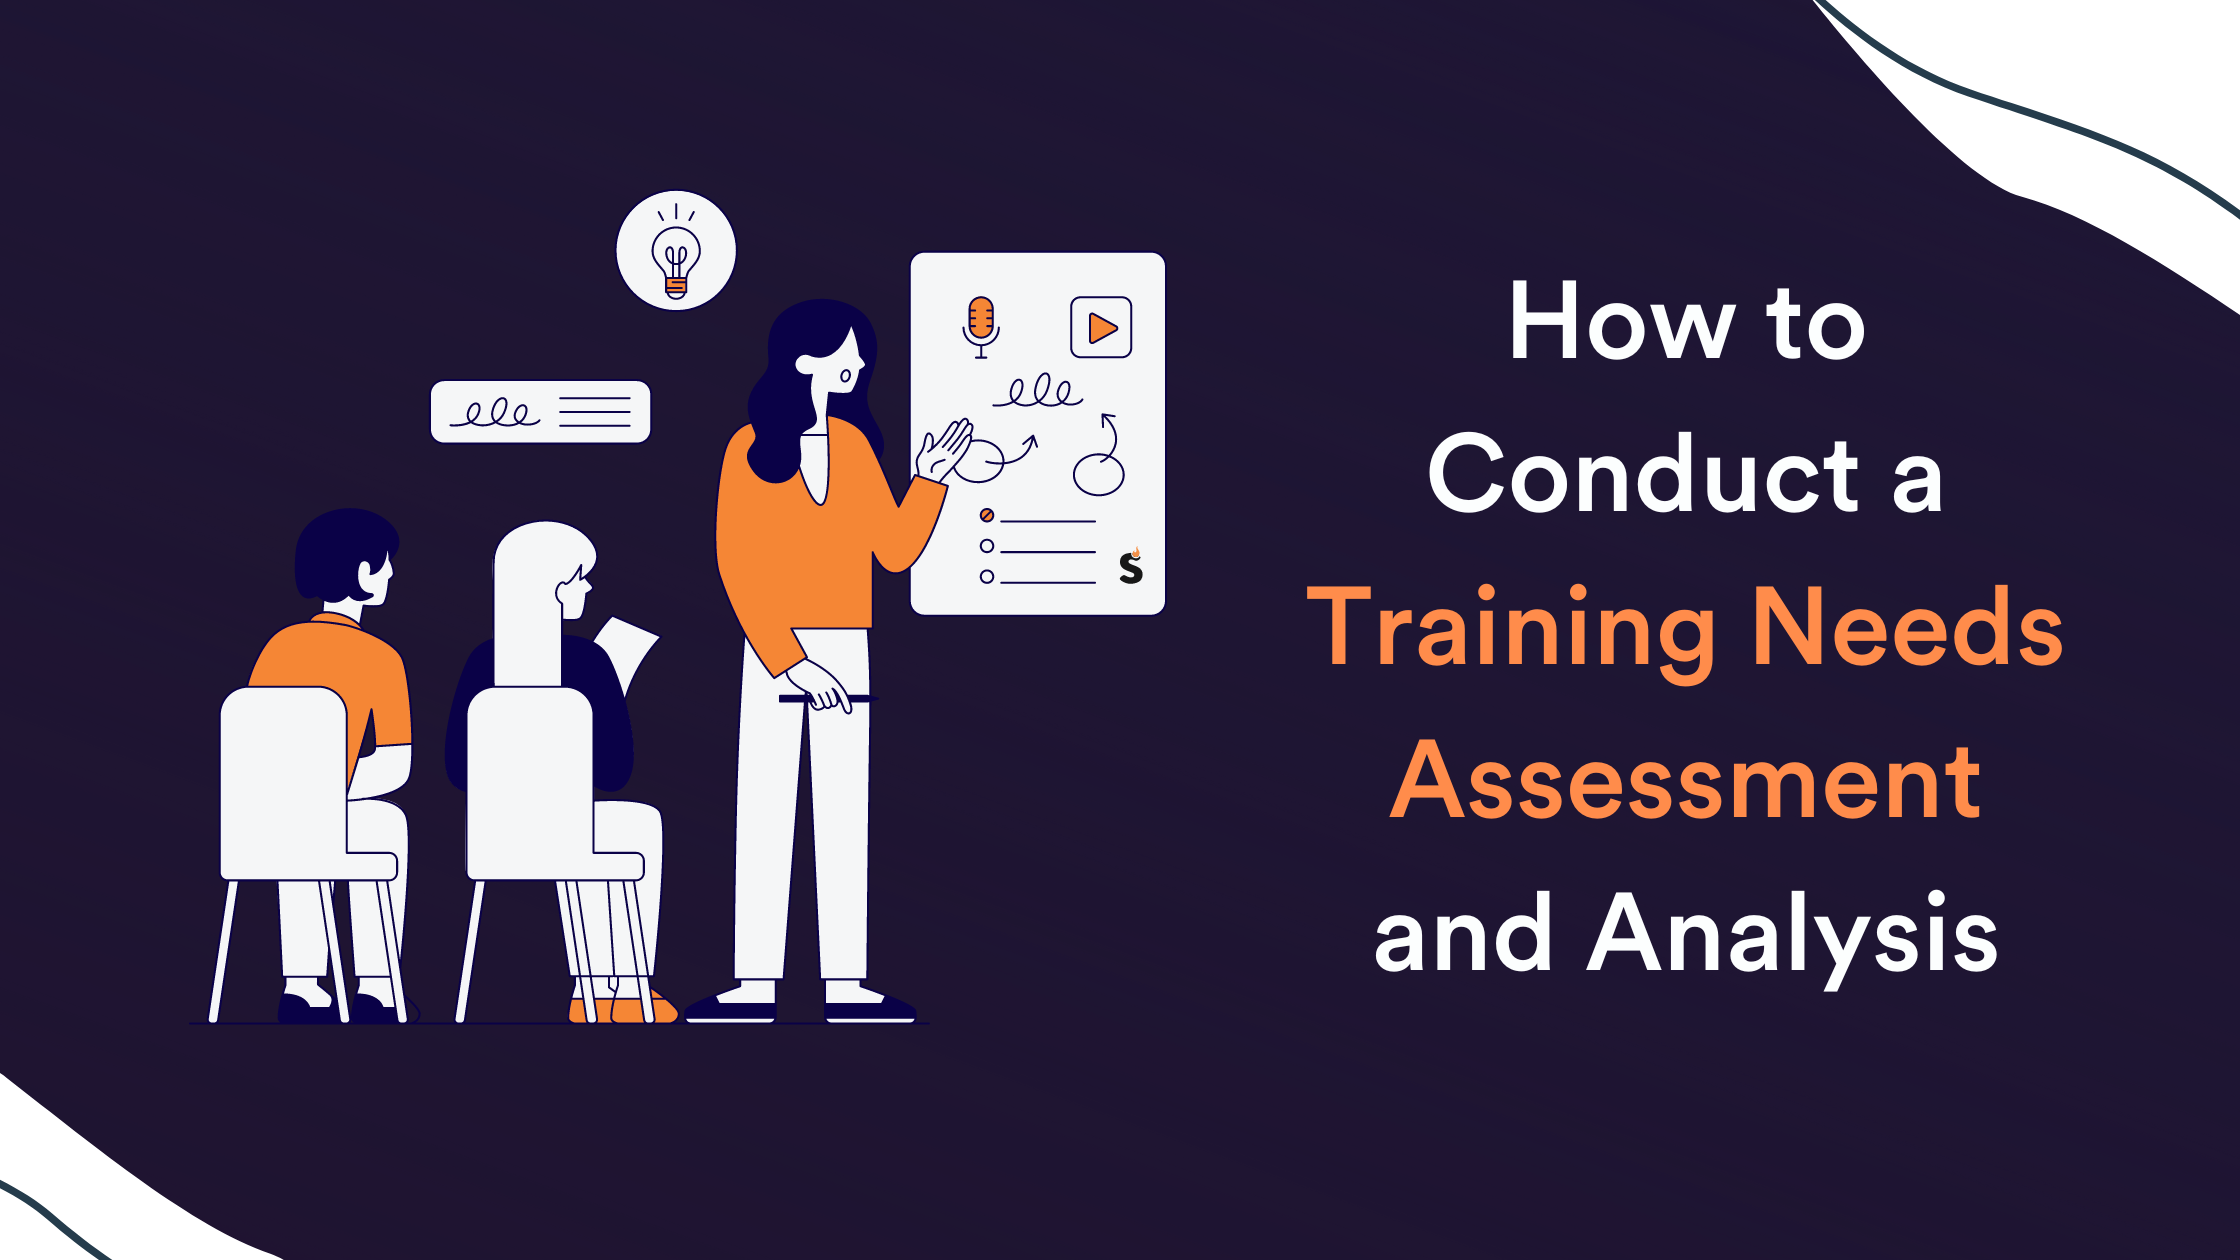 How to Conduct a Training Needs Assessment and Analysis